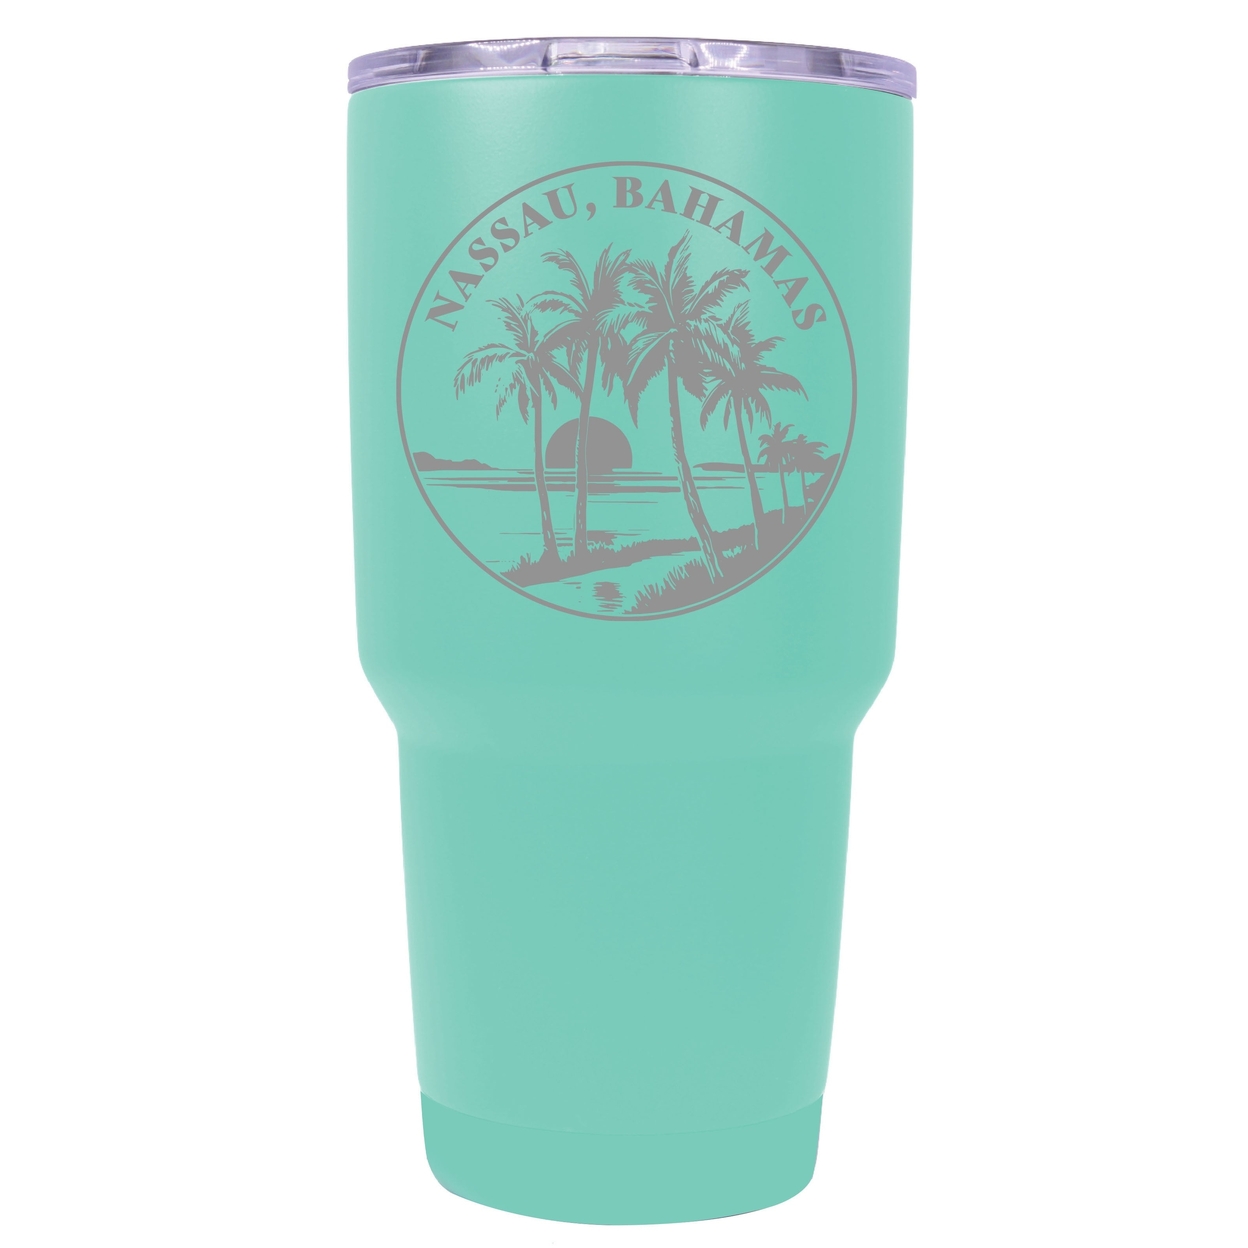 Nassau The Bahamas Souvenir 24 Oz Engraved Insulated Stainless Steel Tumbler - Red,,Single Unit